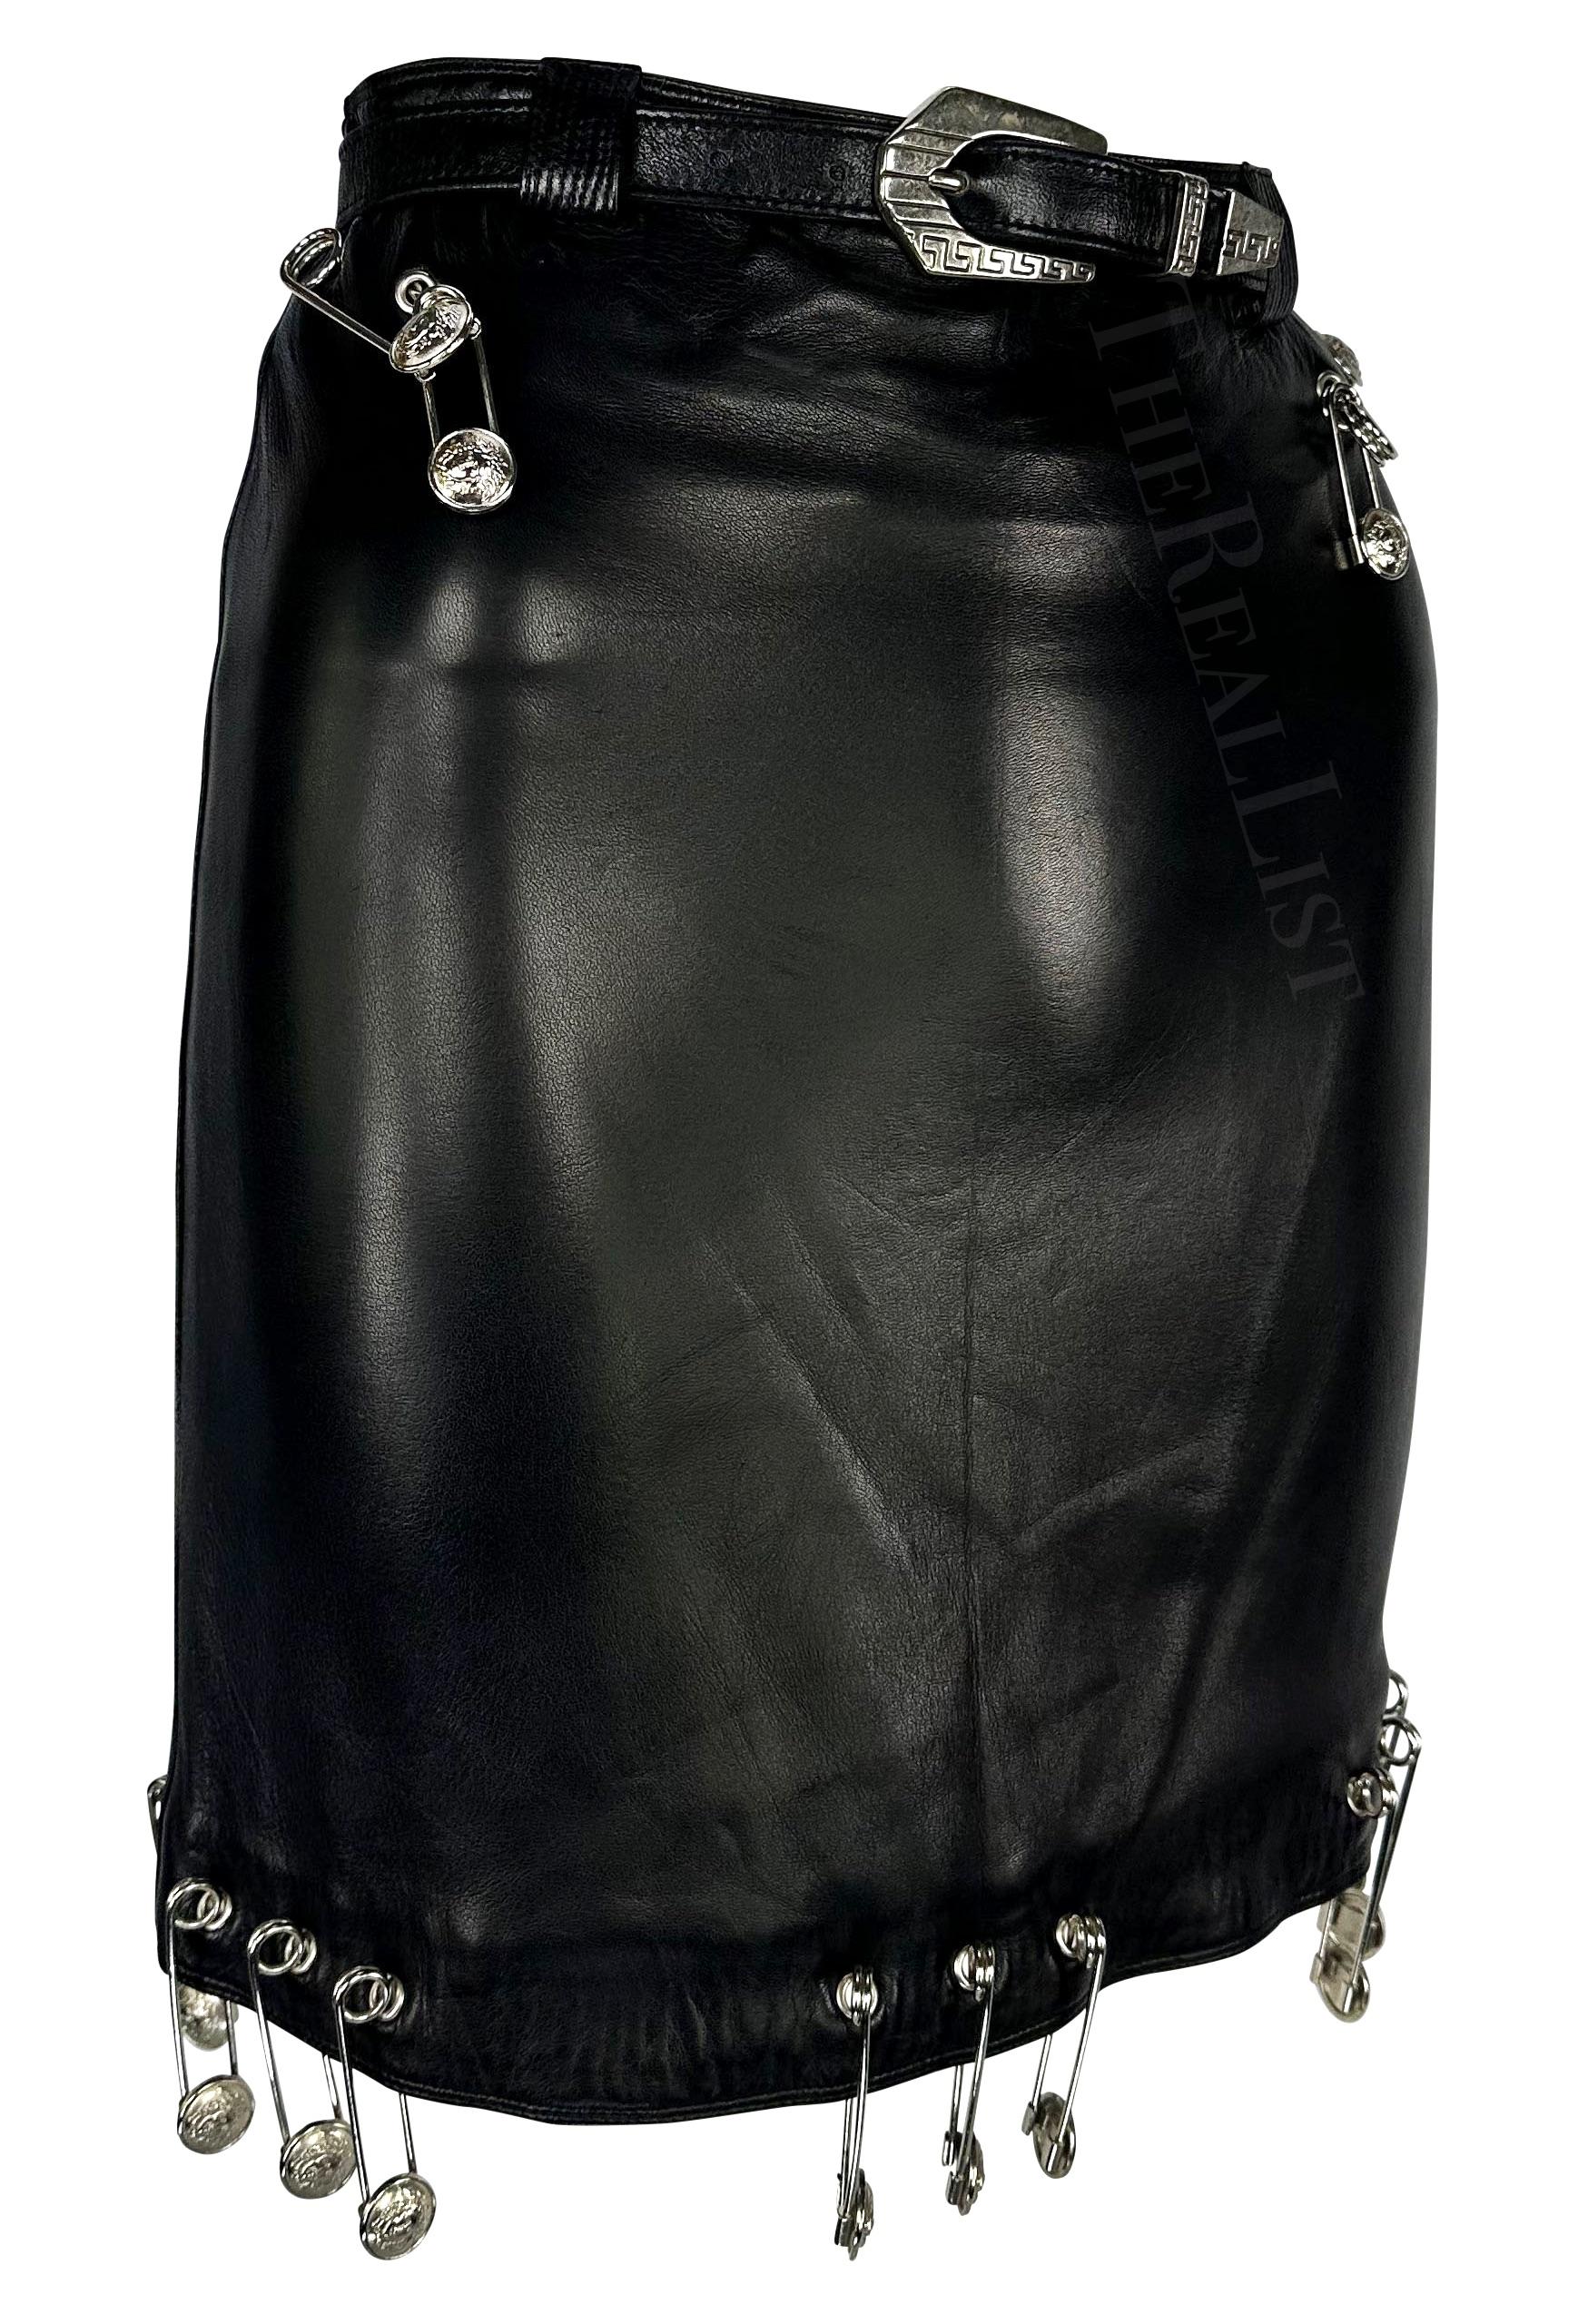 S/S 1994 Gianni Versace Safety Pin Medusa Pierced Black Leather Belted Skirt For Sale 8